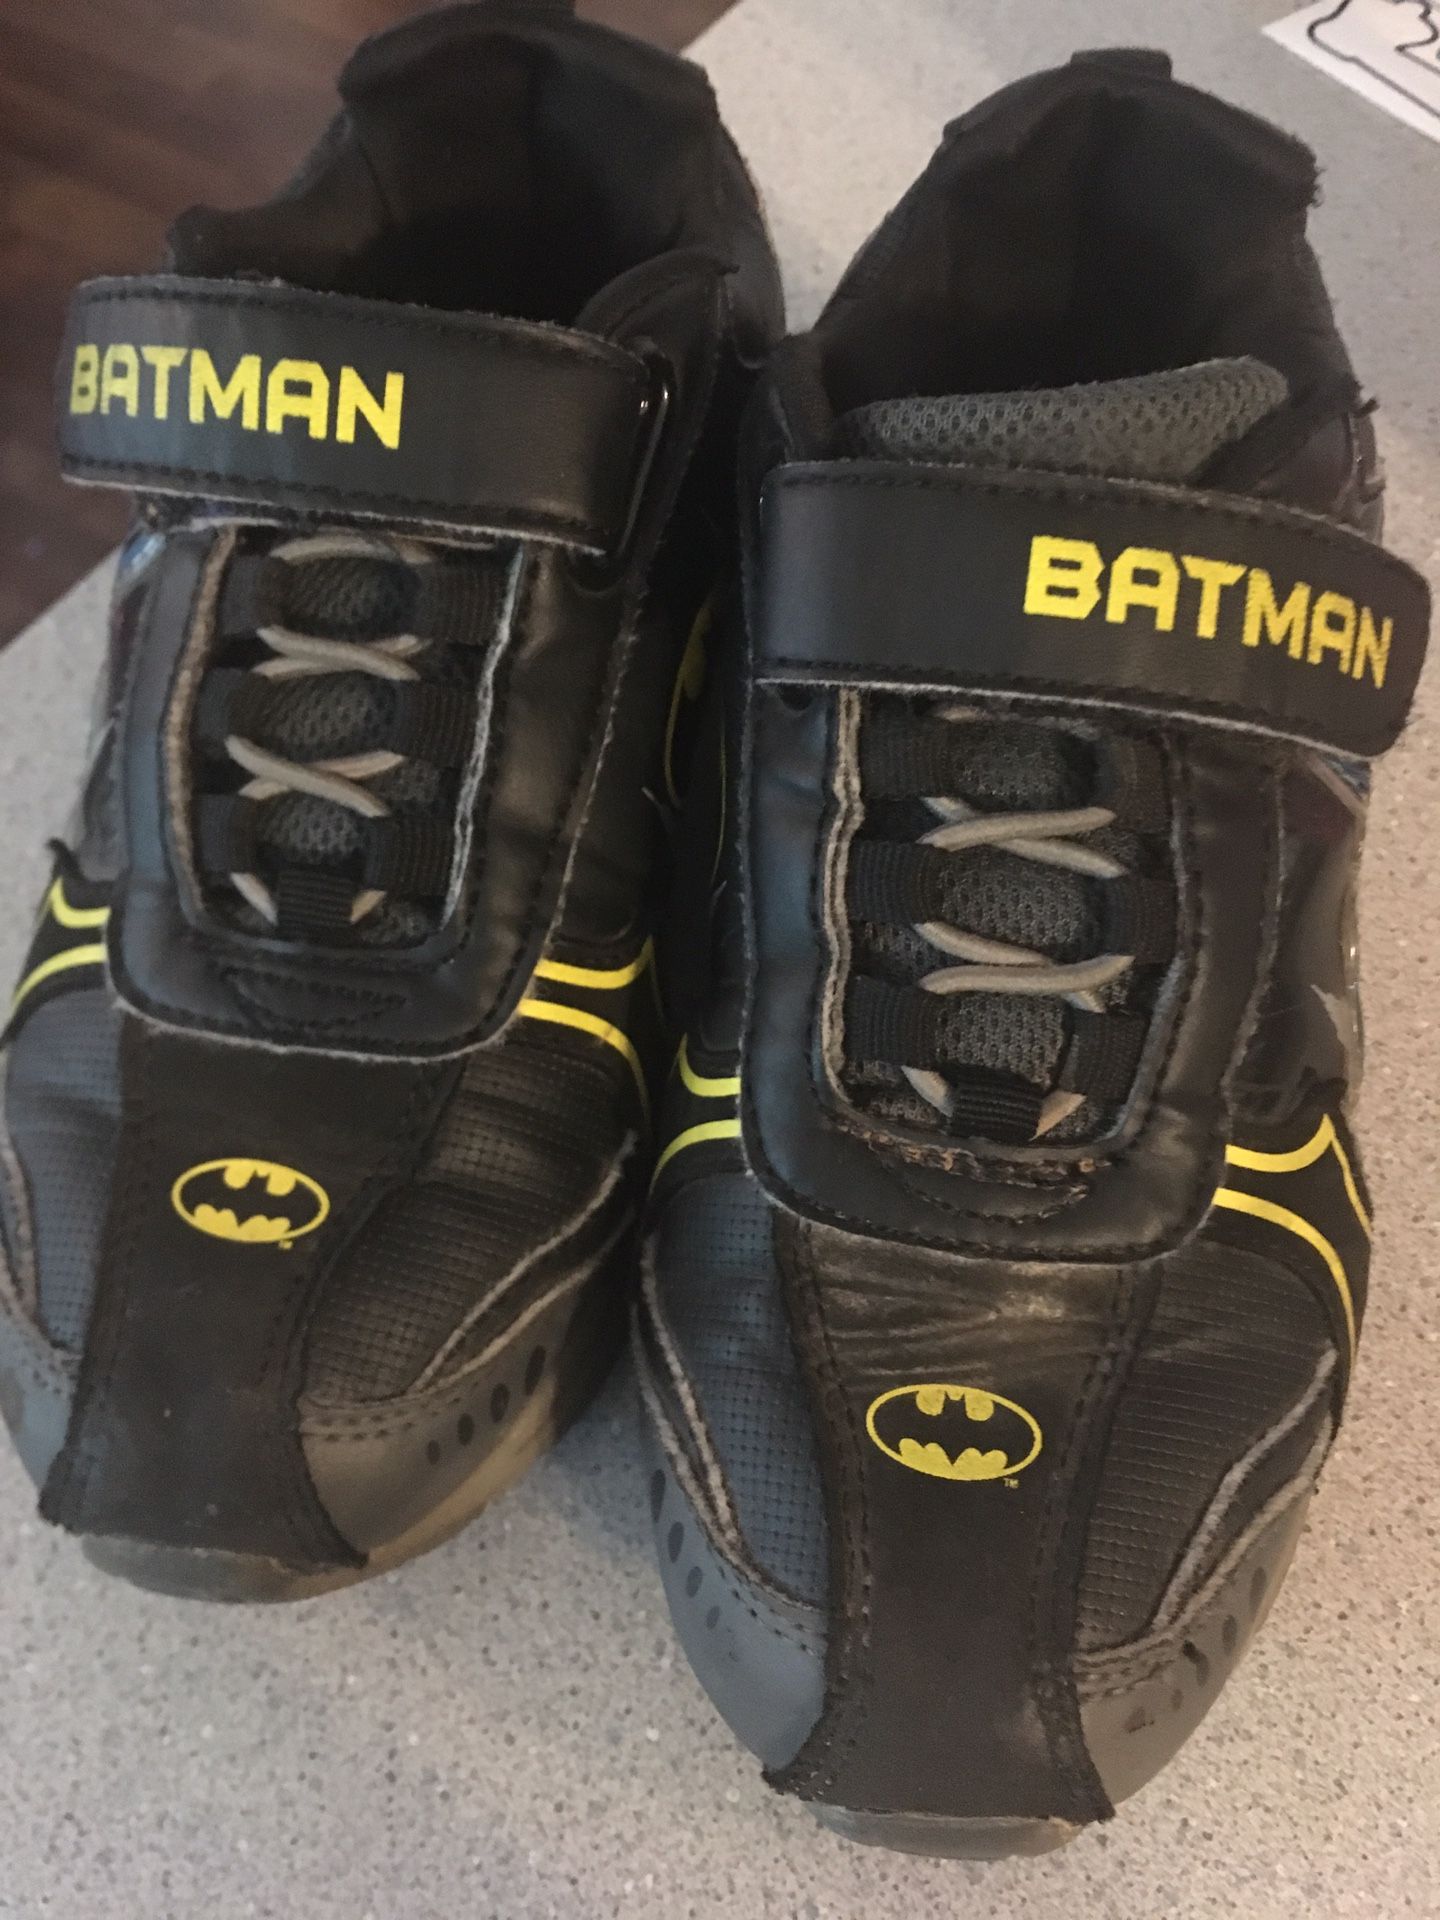 Batman shoes size 12 for toddler